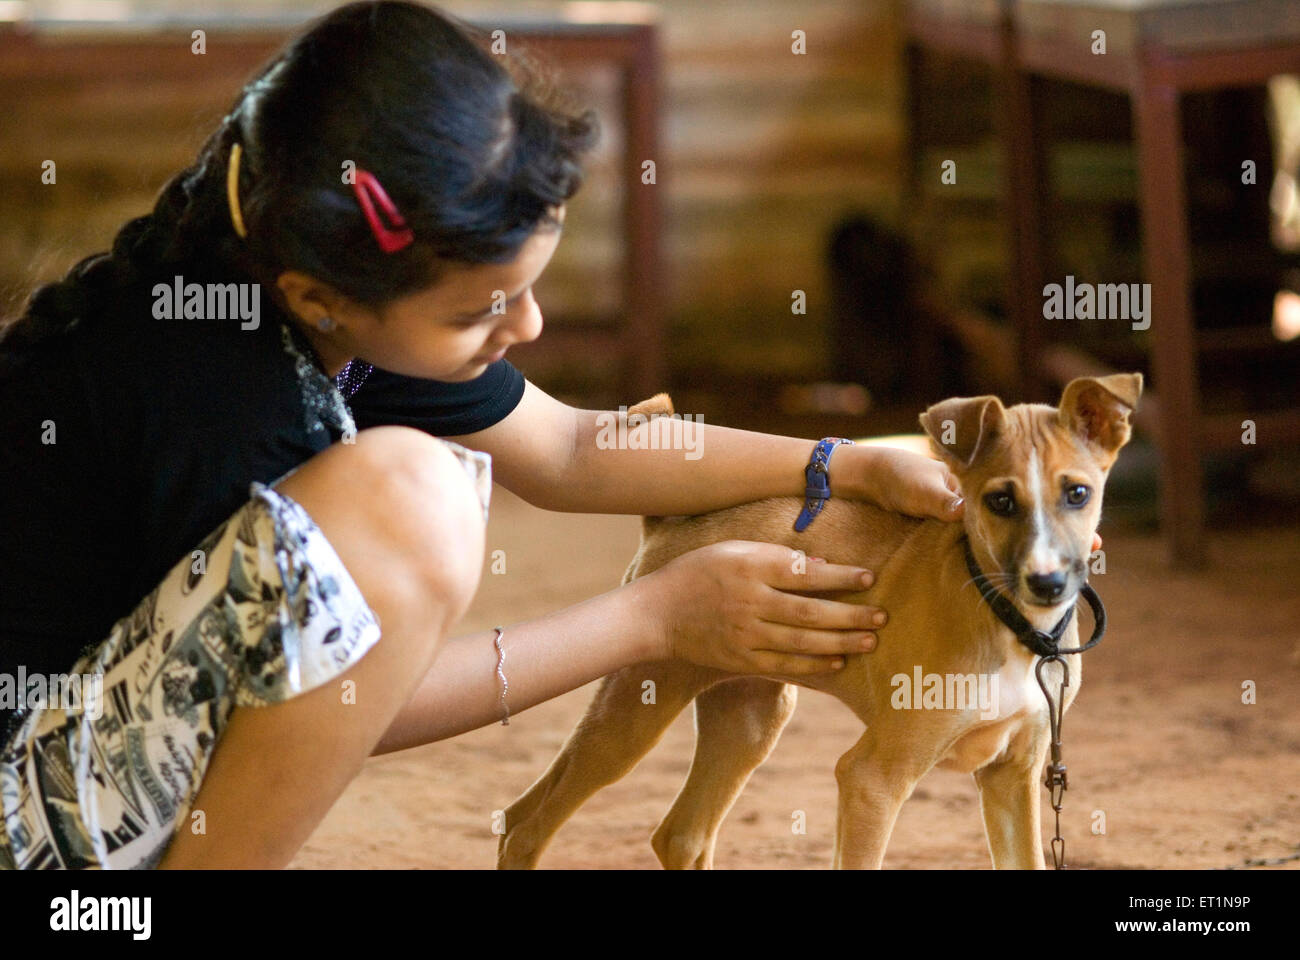 Young girl and puppy small dog in playing mood MR#556 Stock Photo